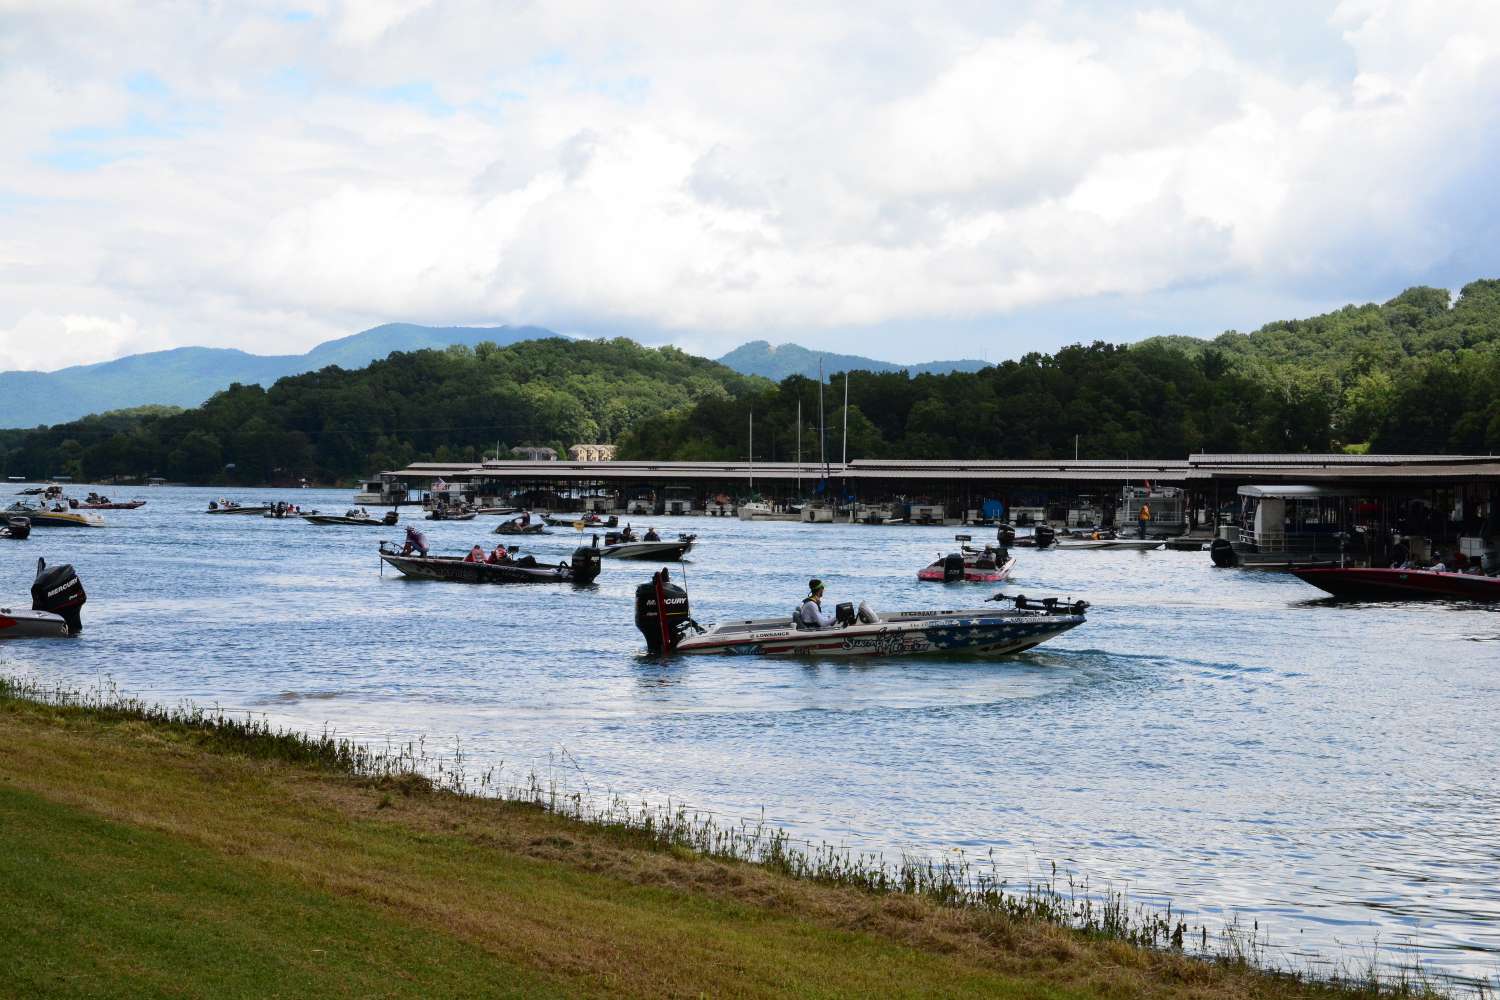 The competitors check in on Chatuge Reservoir when theyâre done for the day. Today is cut day at the 2014 Carhartt Bassmaster College Series National Championship.